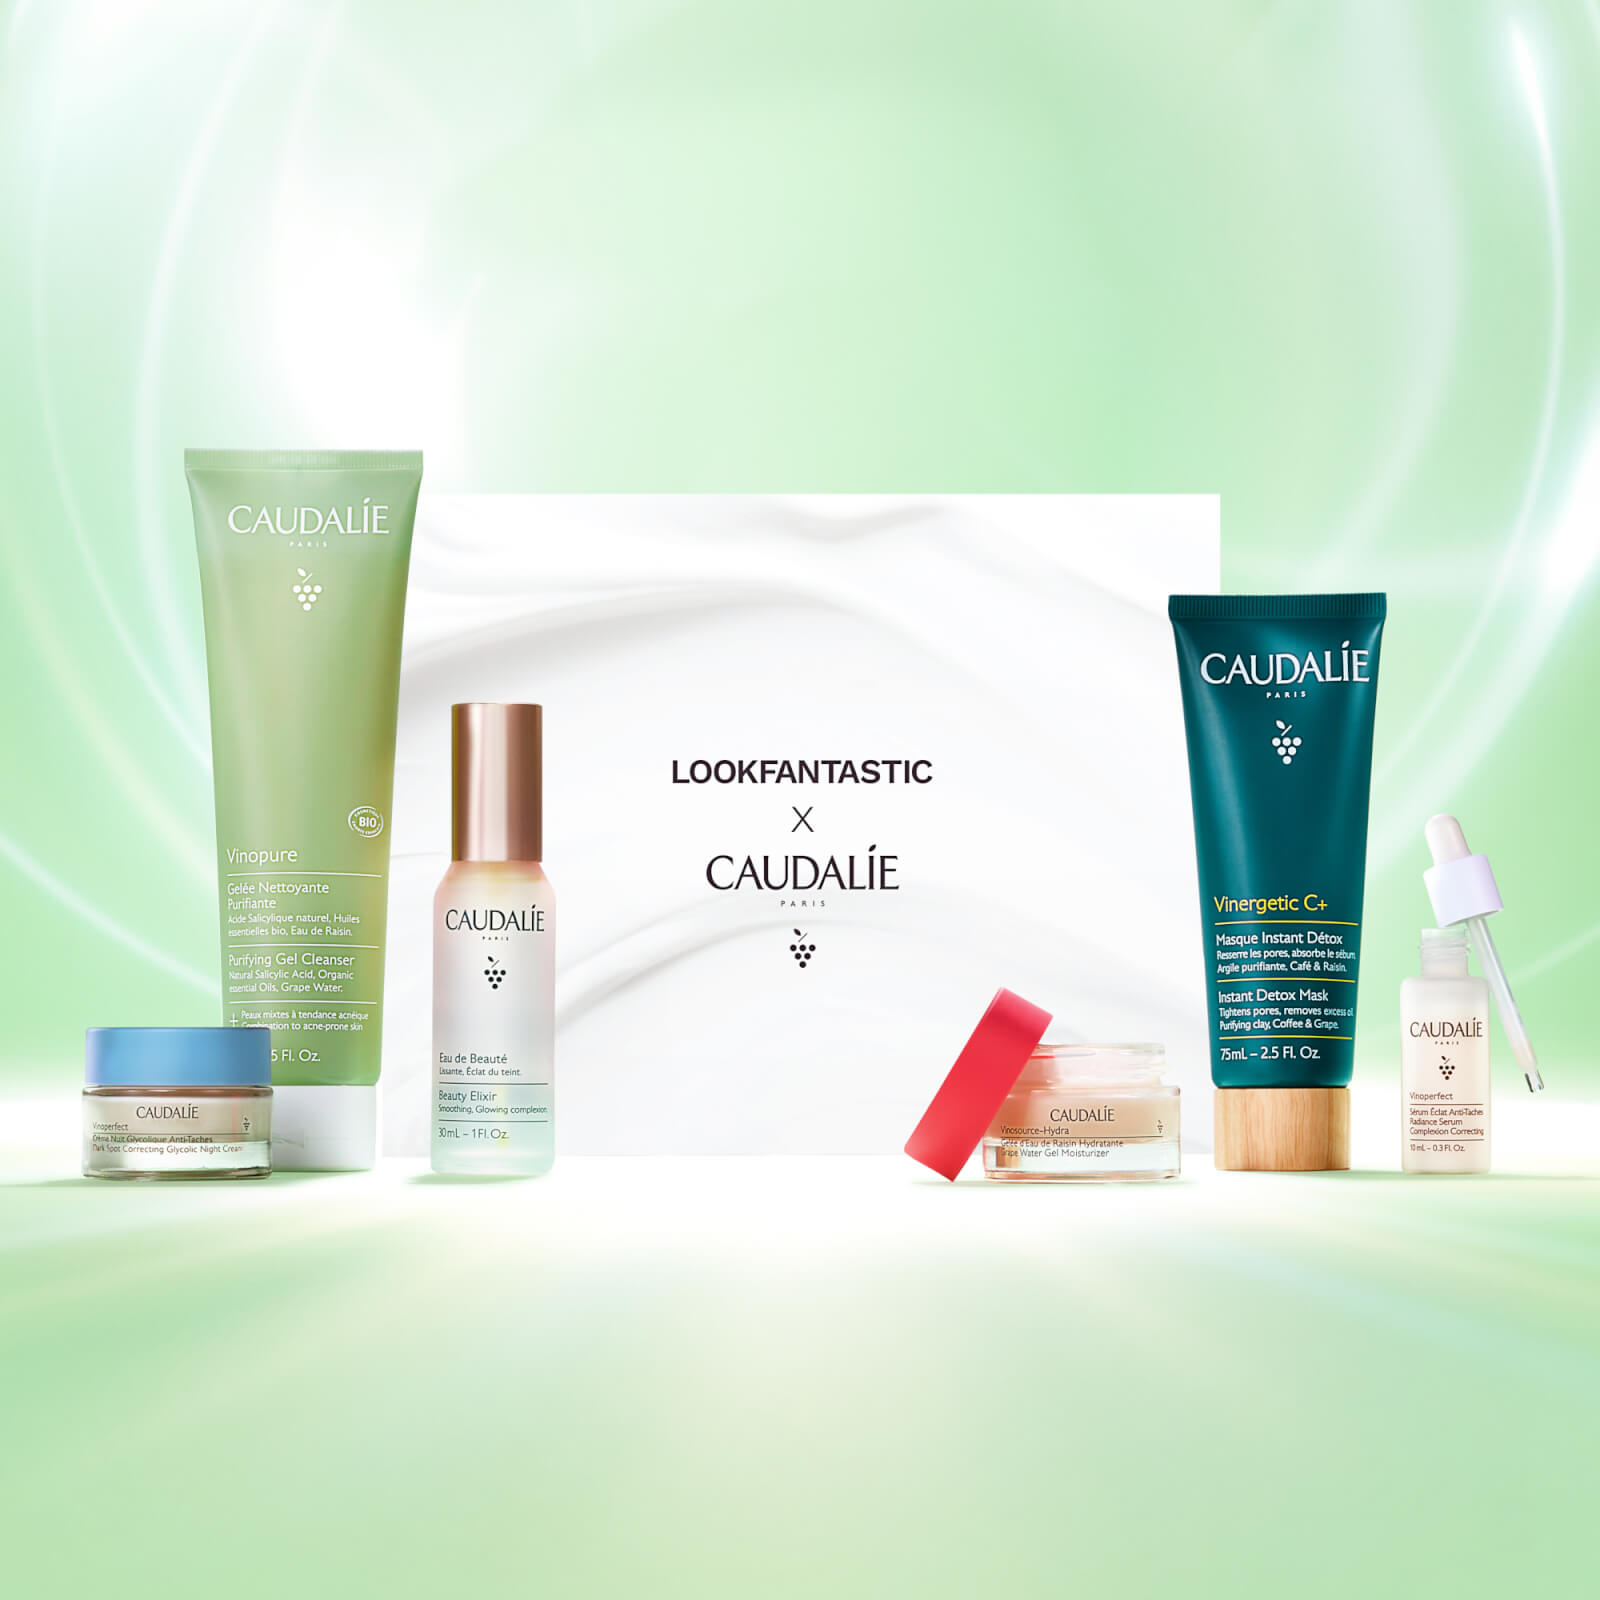 LOOKFANTASTIC Caudalie Limited Edition Box (worth over £96) product